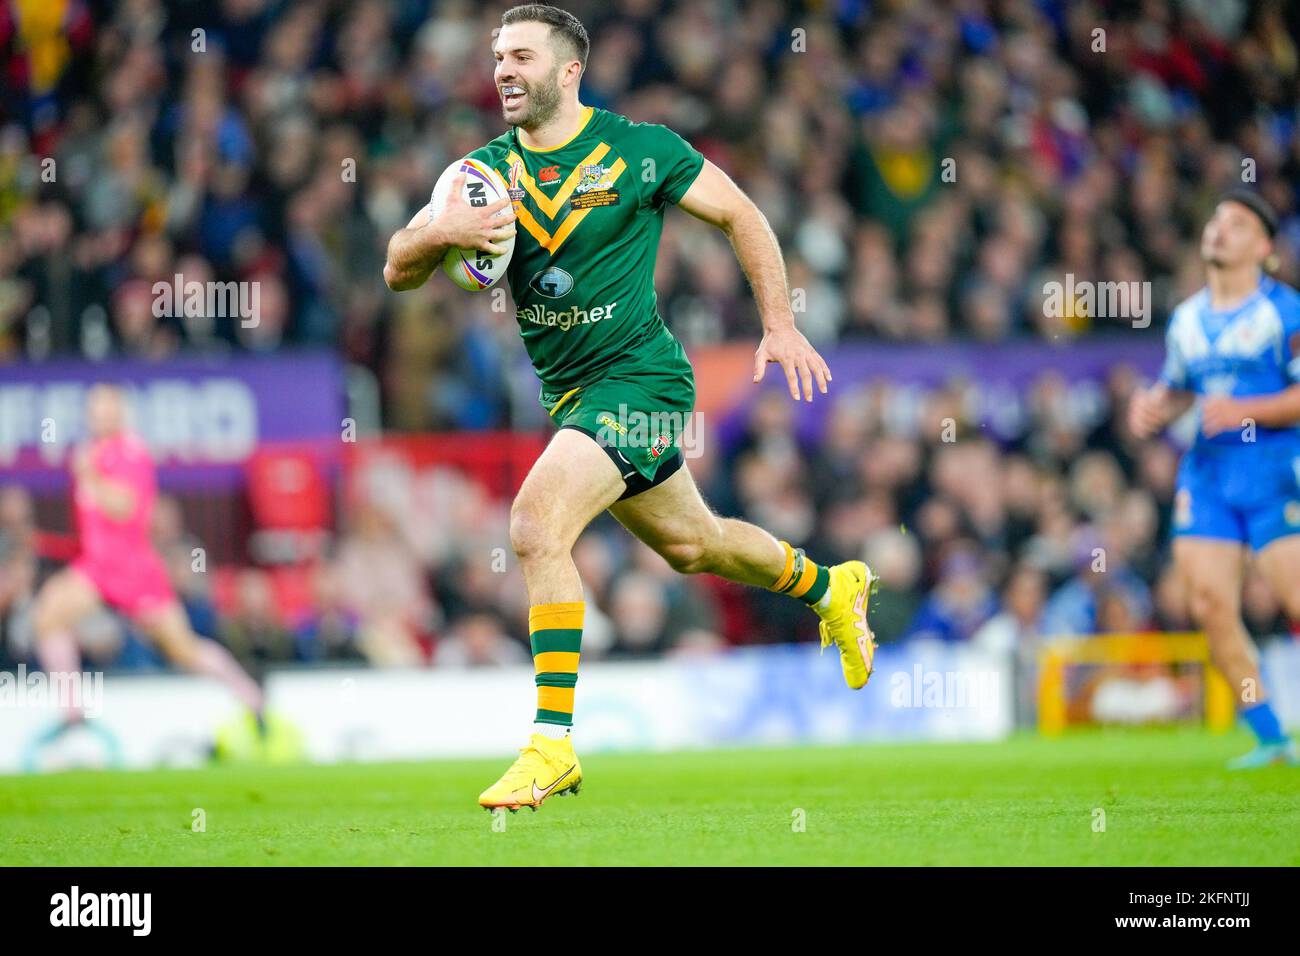 Manchester, UK. 18th Nov, 2022. James Tedesco (C) (Sydney Roosters) of Australia (1) breaks free to score his team's second try during the 2021 Rugby League World Cup Final 2021 match between Australia and Samoa at Old Trafford, Manchester, England on 19 November 2022. Photo by David Horn. Credit: PRiME Media Images/Alamy Live News Stock Photo